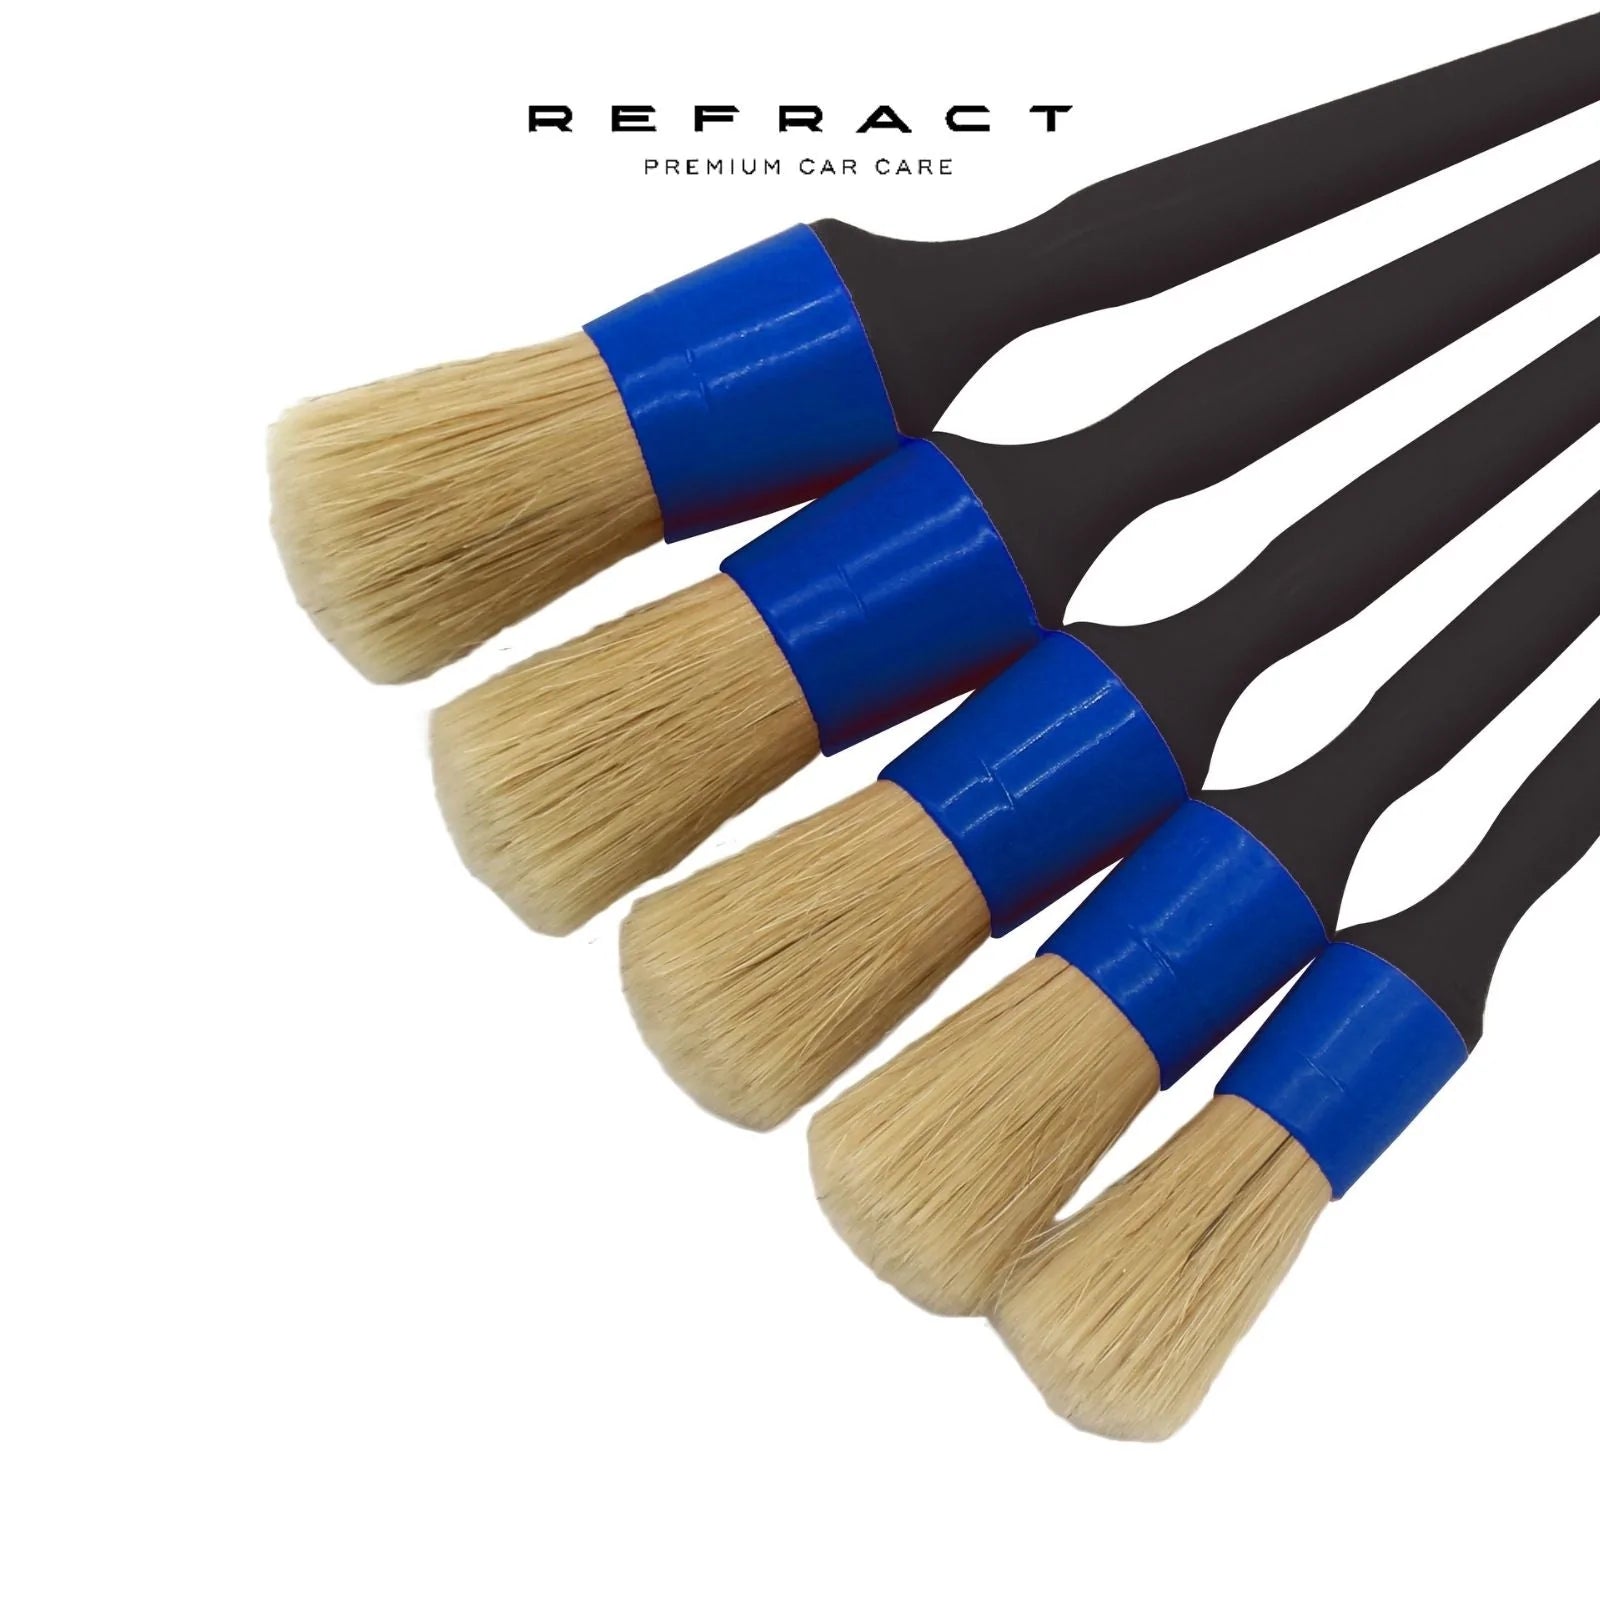 Refract Detailing Brushes - Boxed Set of 5 pc